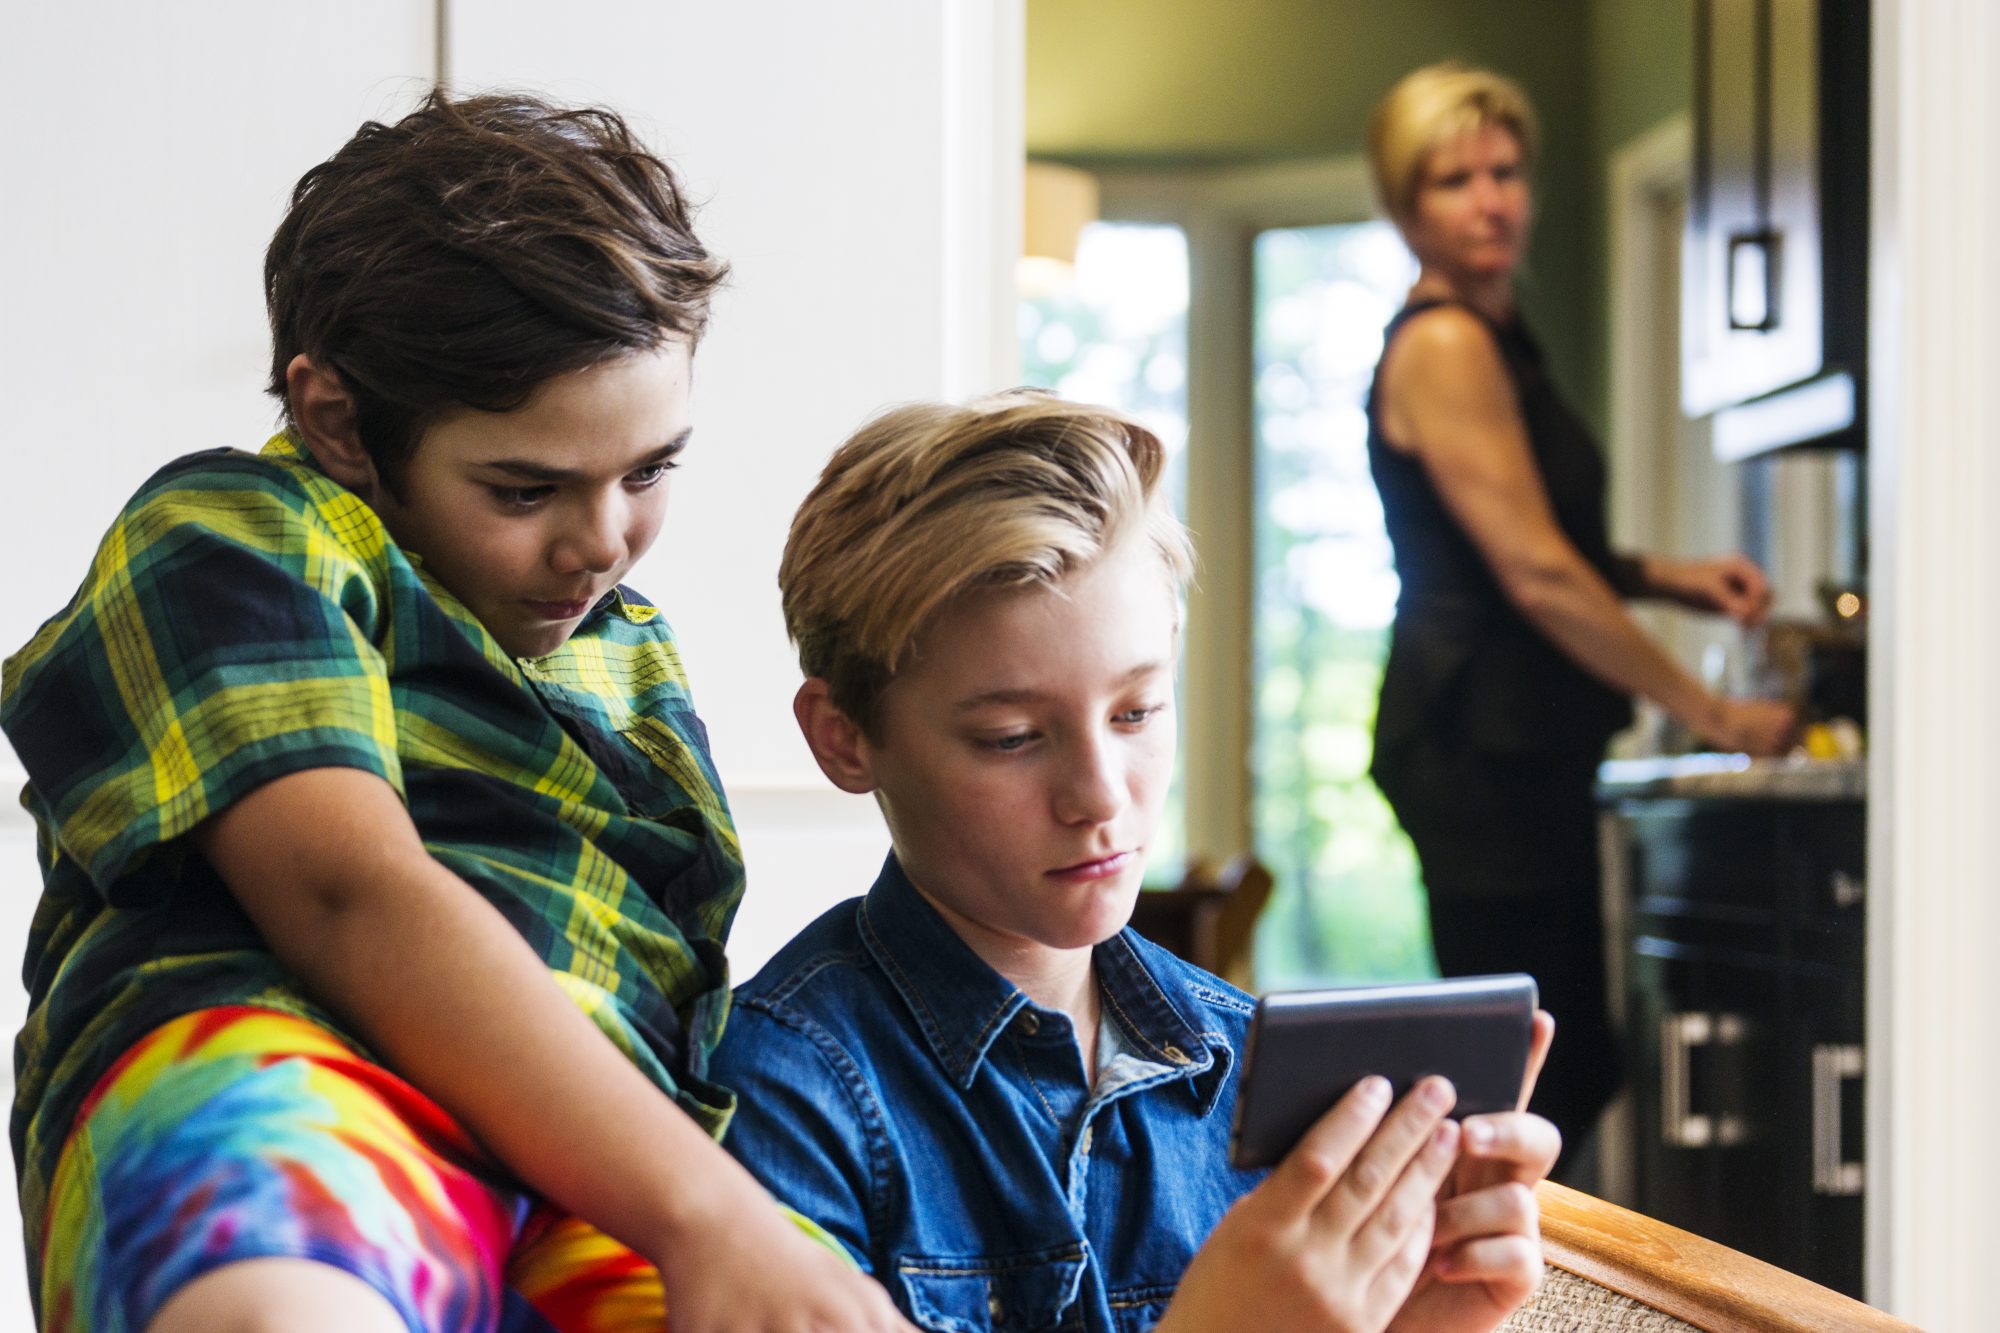 A mother looks on from the kitchen as two pre-teen boys use a smartphone in the living room. She is out of focus but it is clear to see her sense of discomfort with what they are doing on the internet.